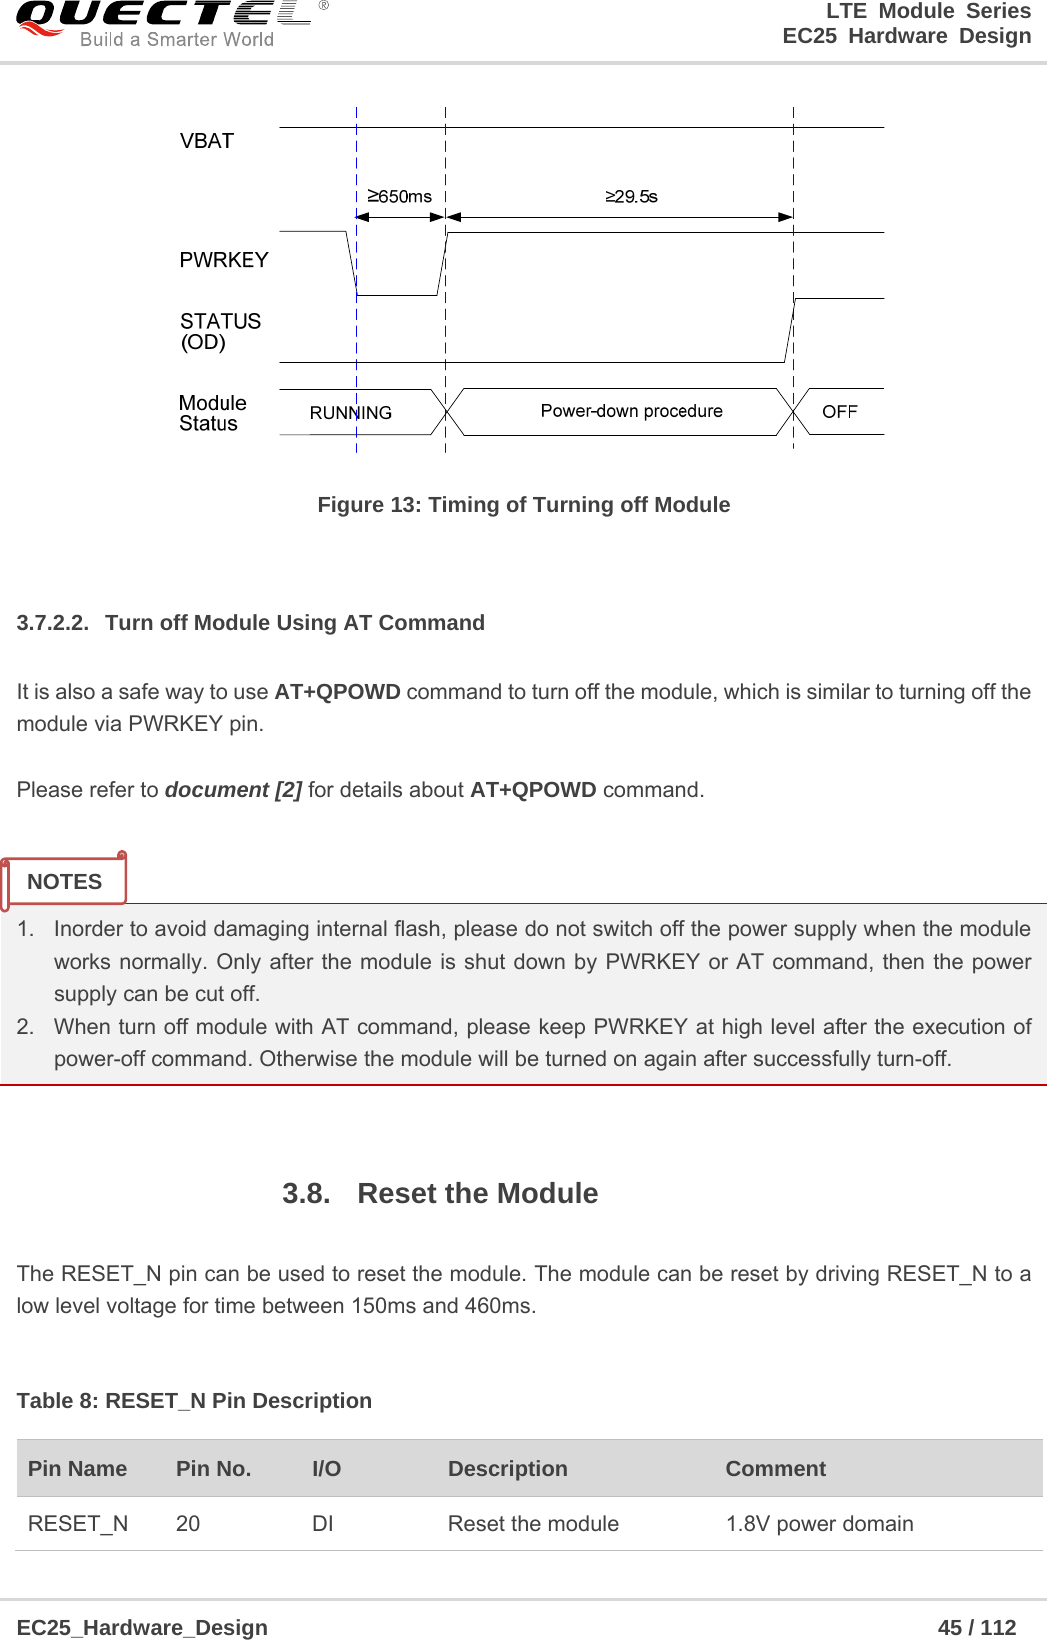 LTE Module Series                                                  EC25 Hardware Design  EC25_Hardware_Design                                                             45 / 112     Figure 13: Timing of Turning off Module  3.7.2.2.  Turn off Module Using AT Command It is also a safe way to use AT+QPOWD command to turn off the module, which is similar to turning off the module via PWRKEY pin.  Please refer to document [2] for details about AT+QPOWD command.   1.  Inorder to avoid damaging internal flash, please do not switch off the power supply when the module works normally. Only after the module is shut down by PWRKEY or AT command, then the power supply can be cut off. 2.  When turn off module with AT command, please keep PWRKEY at high level after the execution of power-off command. Otherwise the module will be turned on again after successfully turn-off.  3.8.  Reset the Module  The RESET_N pin can be used to reset the module. The module can be reset by driving RESET_N to a low level voltage for time between 150ms and 460ms.  Table 8: RESET_N Pin Description Pin Name    Pin No.  I/O  Description  Comment RESET_N  20  DI  Reset the module  1.8V power domain NOTES 